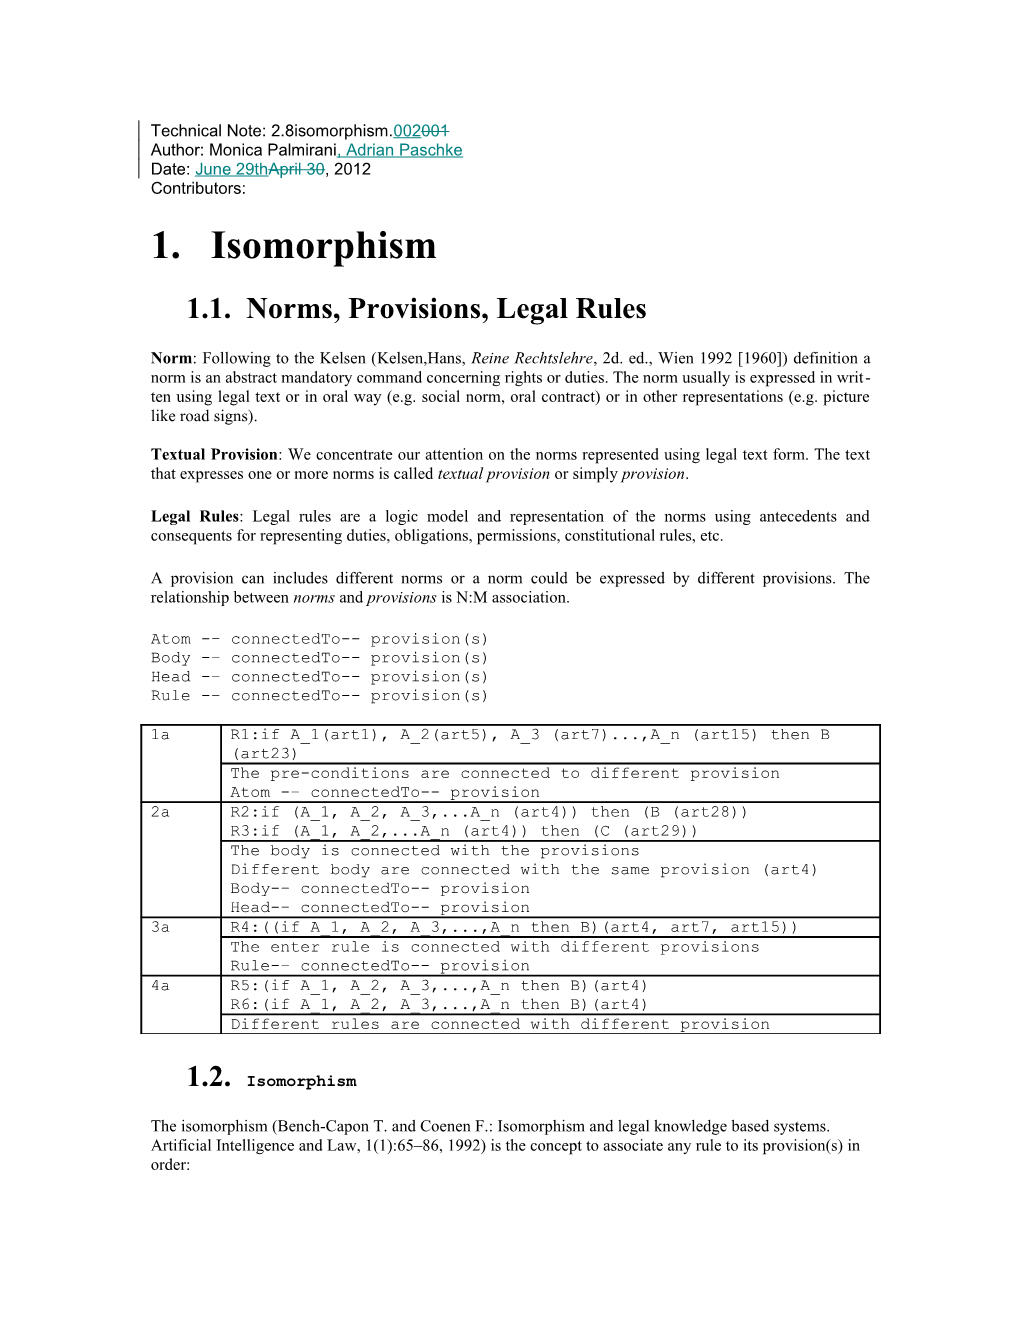 1.1.Norms, Provisions, Legal Rules